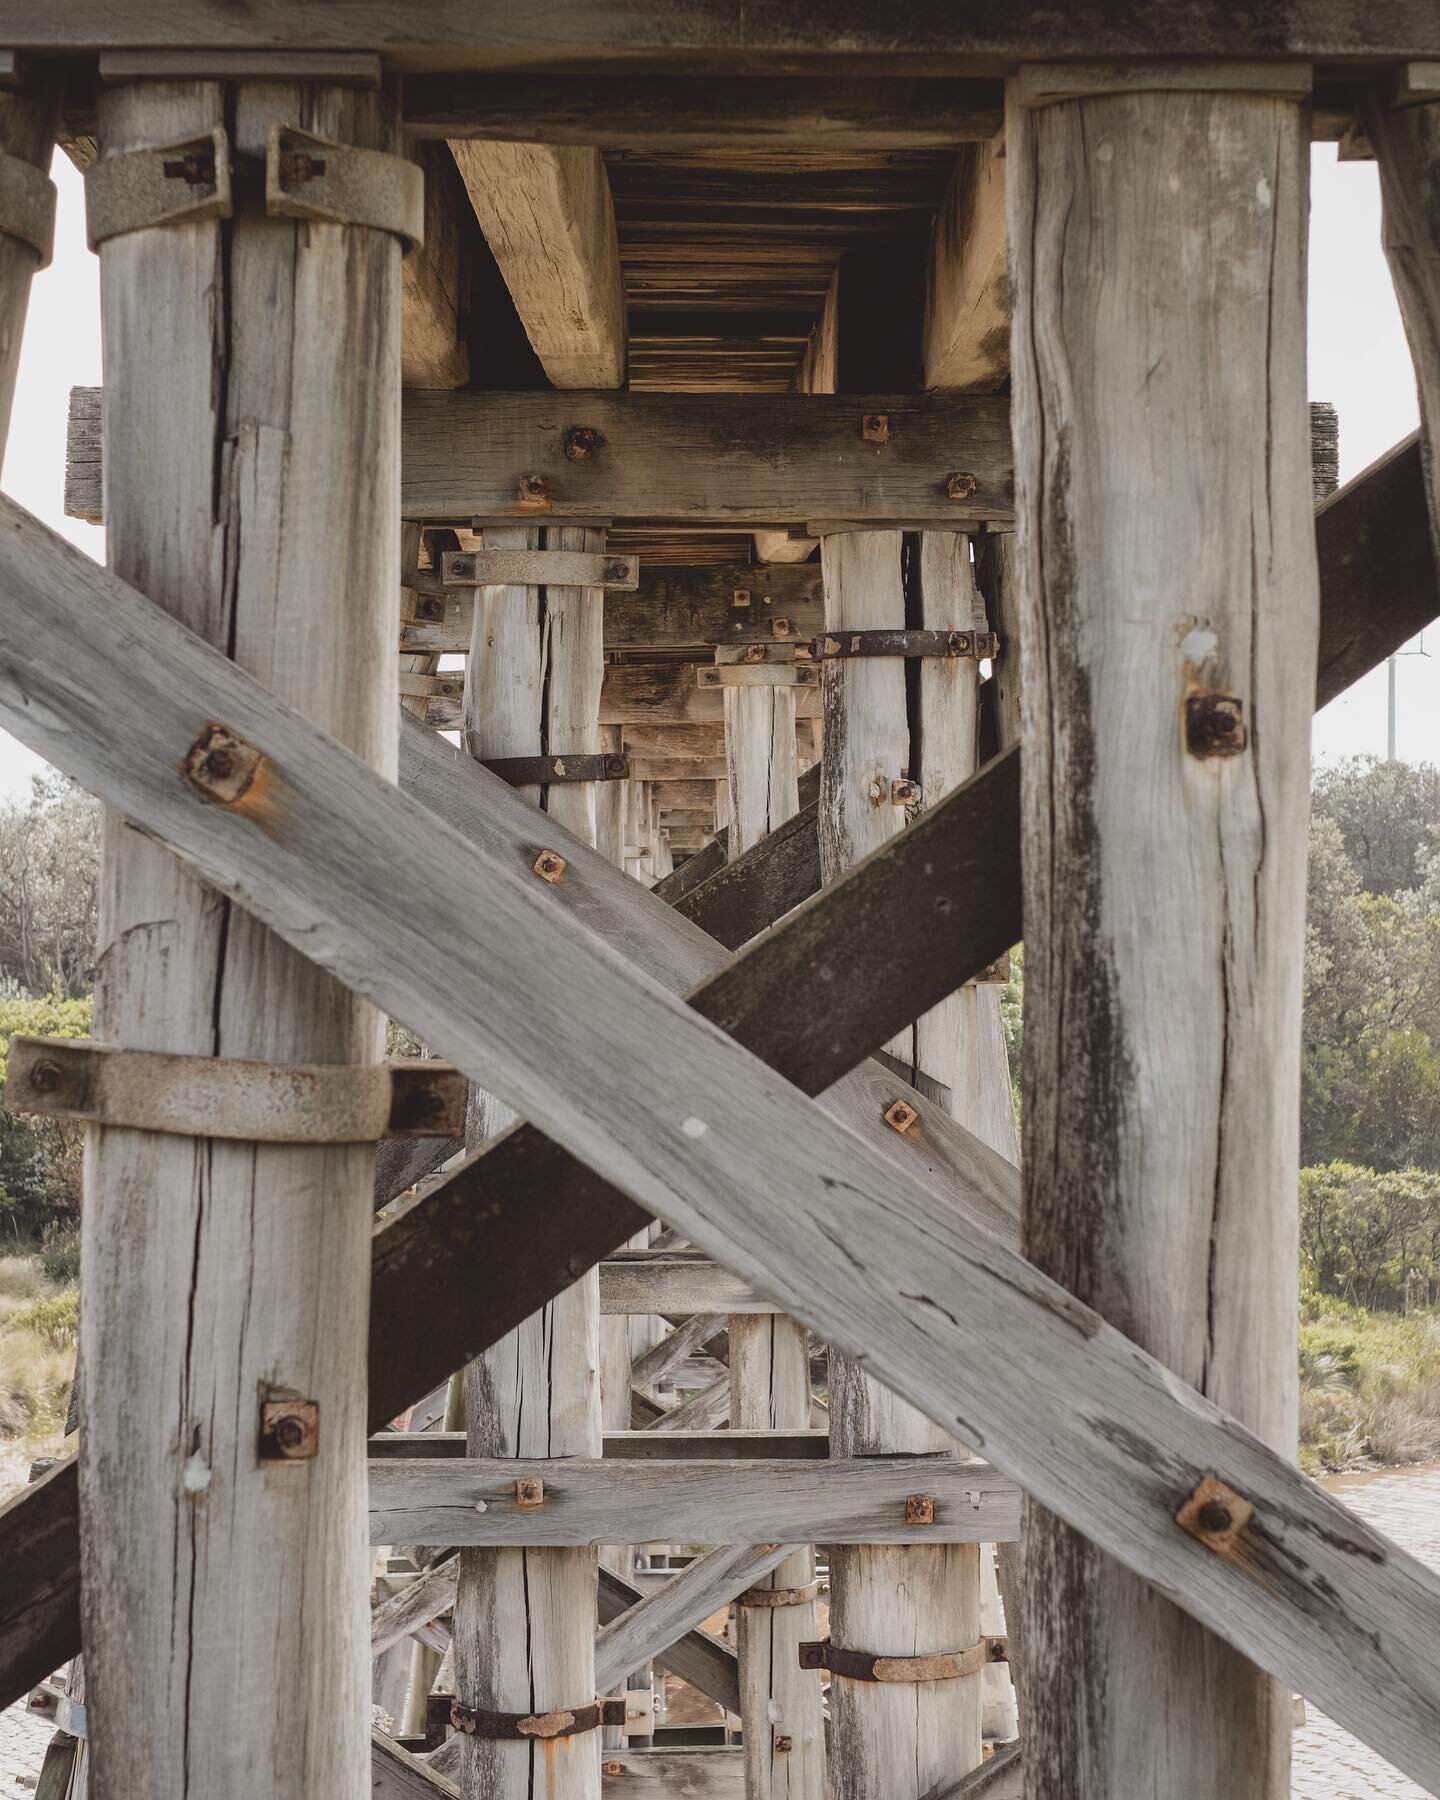 Rainy day view of our iconic Kilcunda Trestle Bridge.
Come over for a cosy fix to @coveboutique_ @udderandhoe @sophiefletcherdesigns @copperdoorco. By appointment visit @hairvisionbyholly and @aboveandbeyondbookkeeping 📷 @theset.au @copperdoorstudio